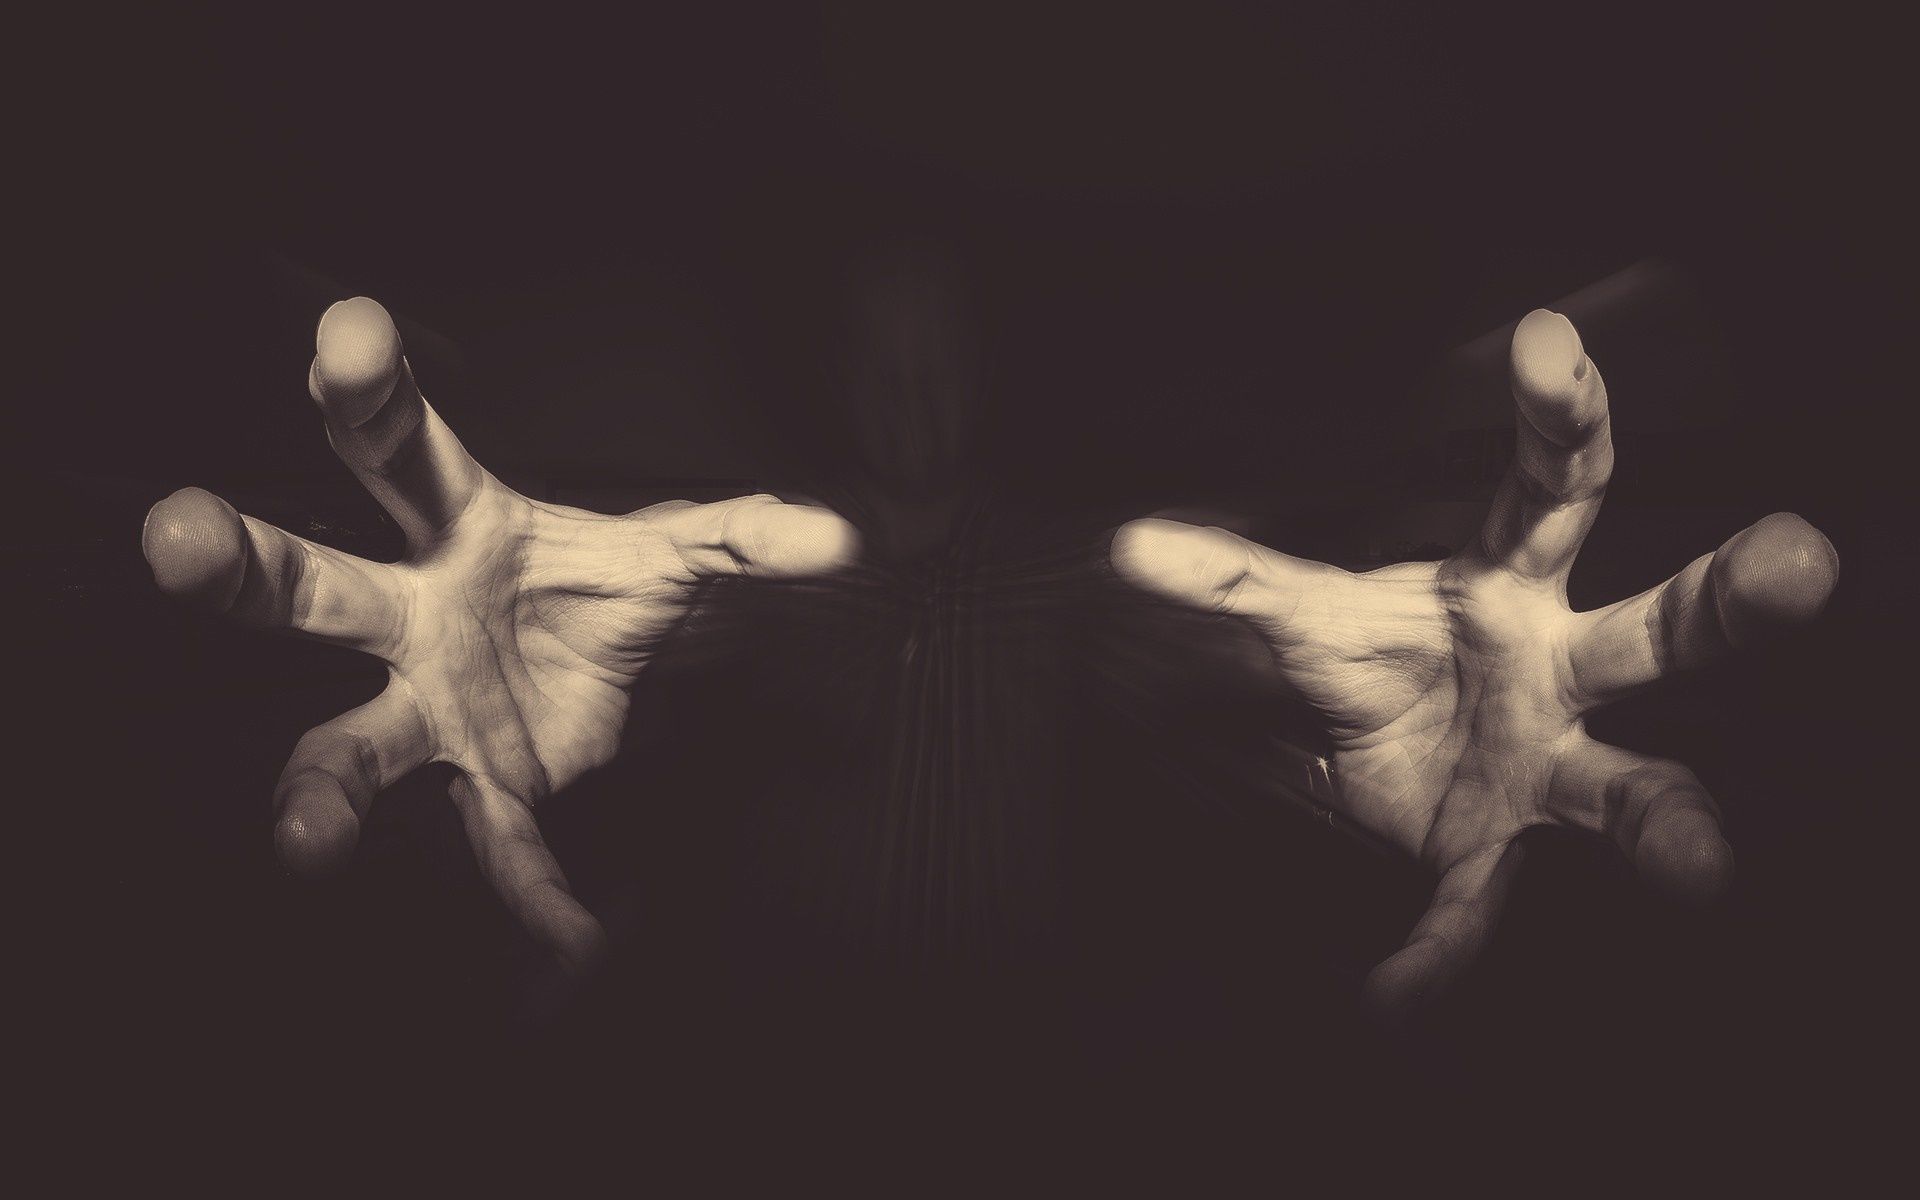 A pair of hands, palms out, in black and white. - Creepy, ballet